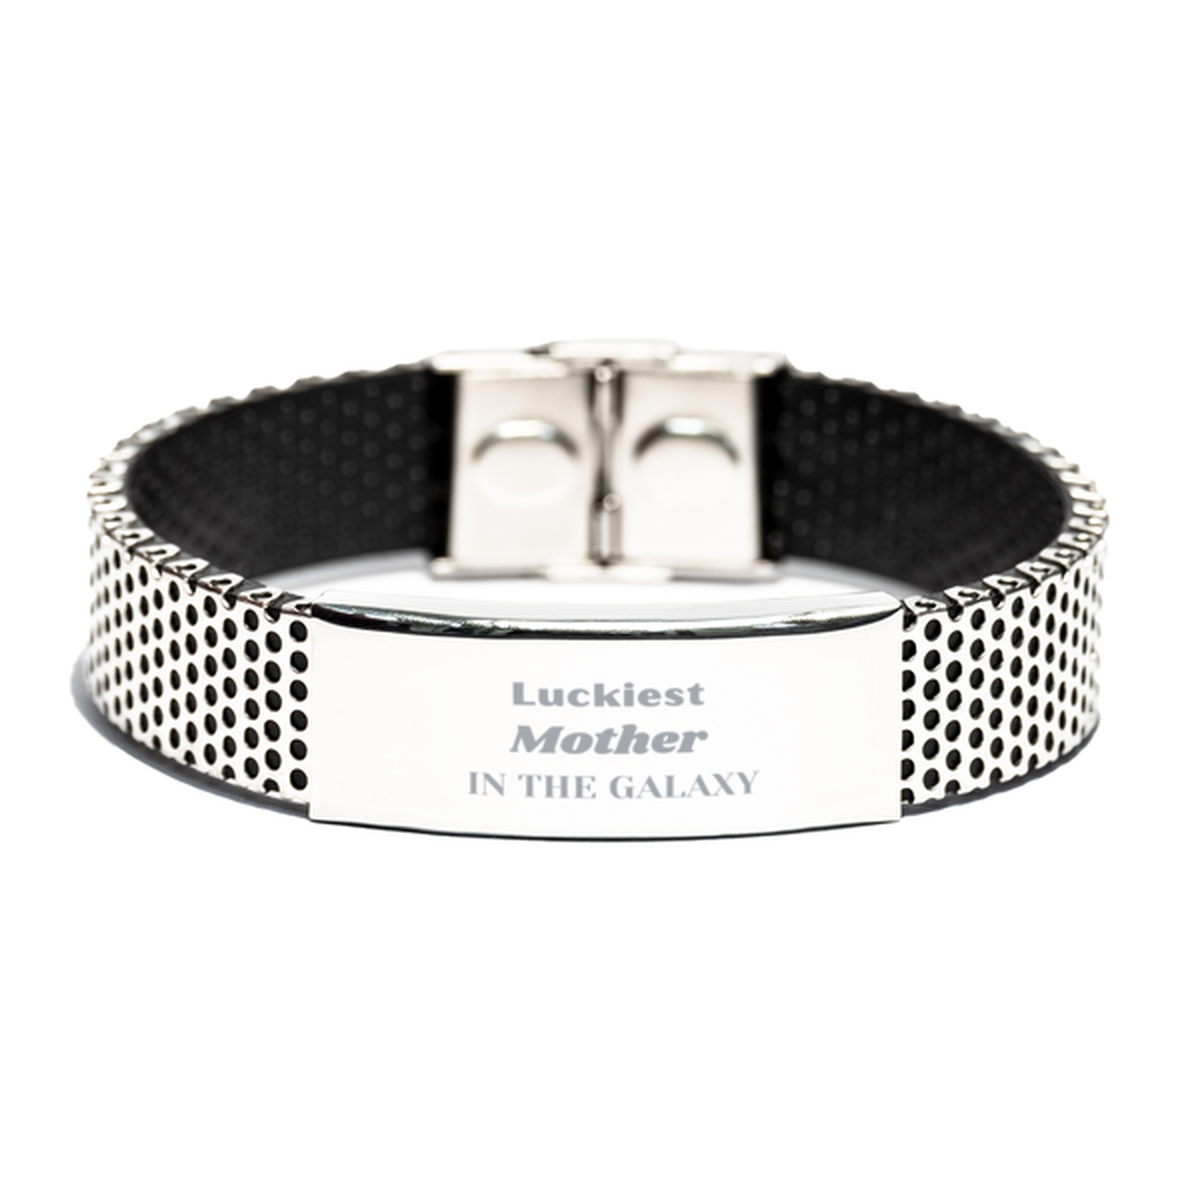 Luckiest Mother in the Galaxy, To My Mother Engraved Gifts, Christmas Mother Stainless Steel Bracelet Gifts, X-mas Birthday Unique Gifts For Mother Men Women